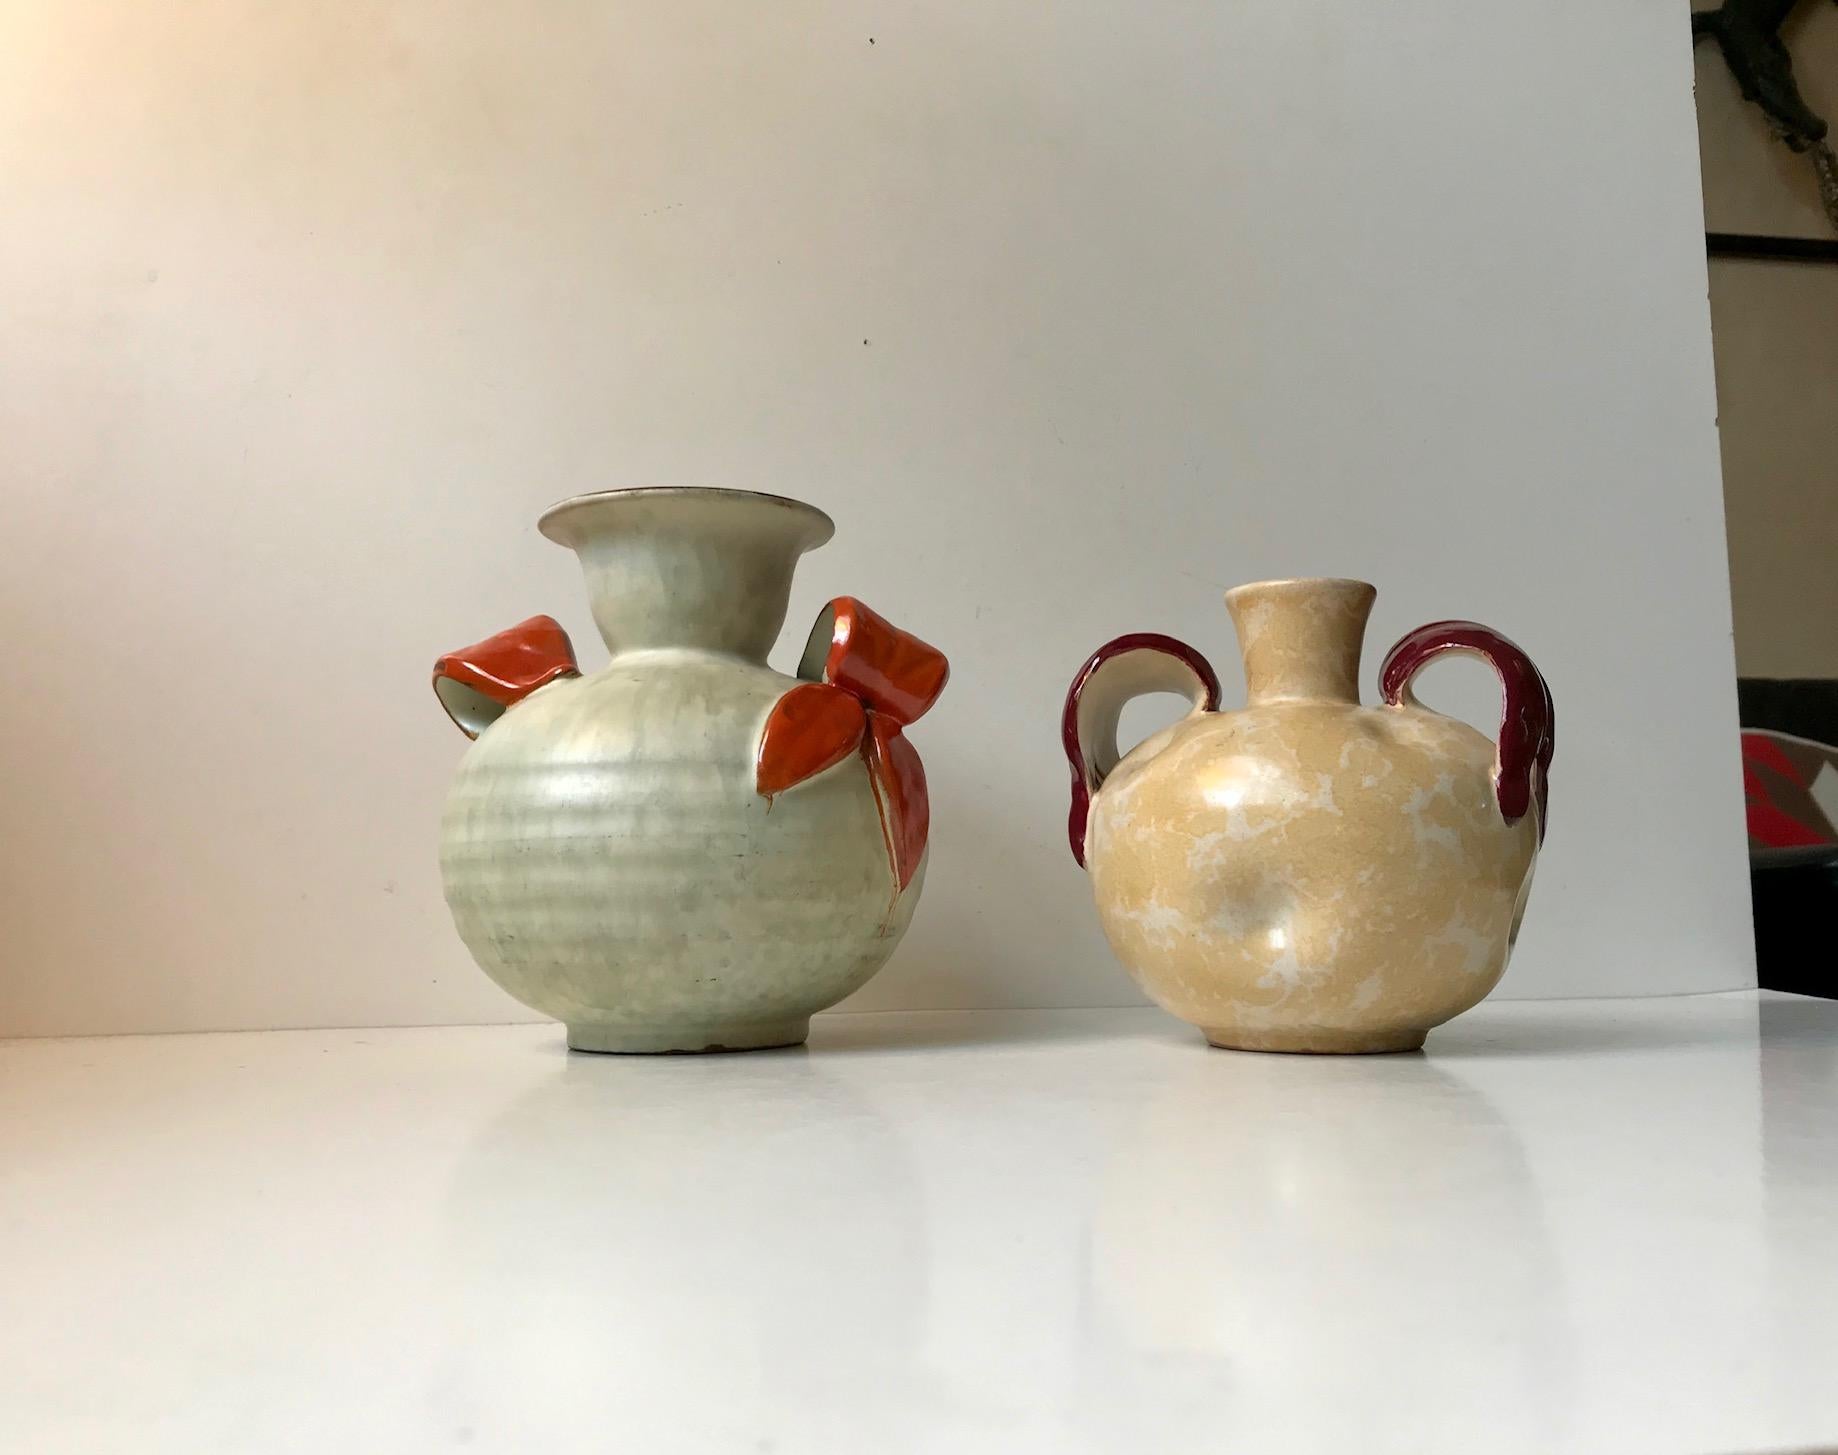 - A set of 1930s ceramic vases decorated with pastel glazes, ribbings, intended 'dents' and colorful bows
- Both vases was designed by Harald Ostergren and manufactured by Ekeby in Uppsala Sweden during the 1930s
- Both vases are marked with model